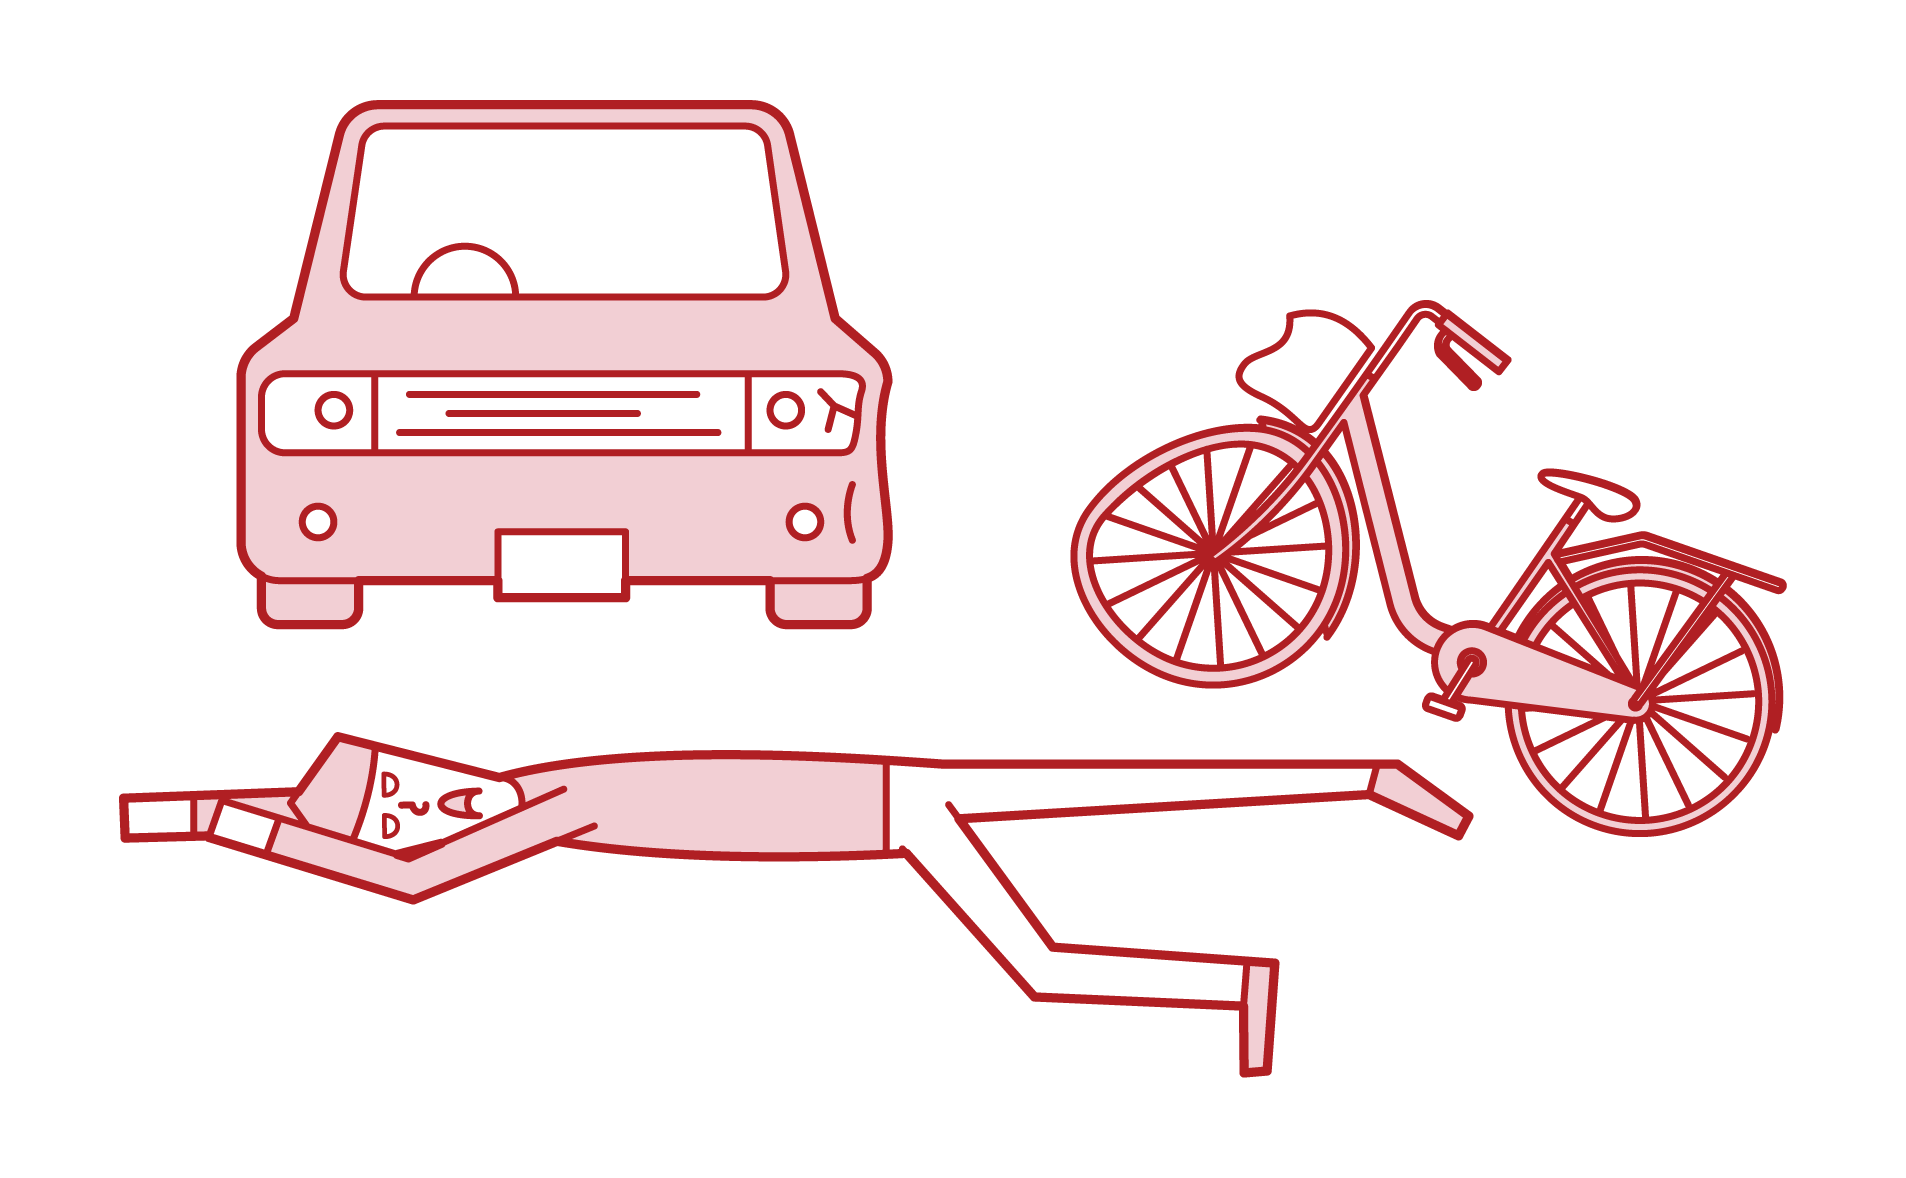 Illustration of a man who is collapsed in a traffic accident